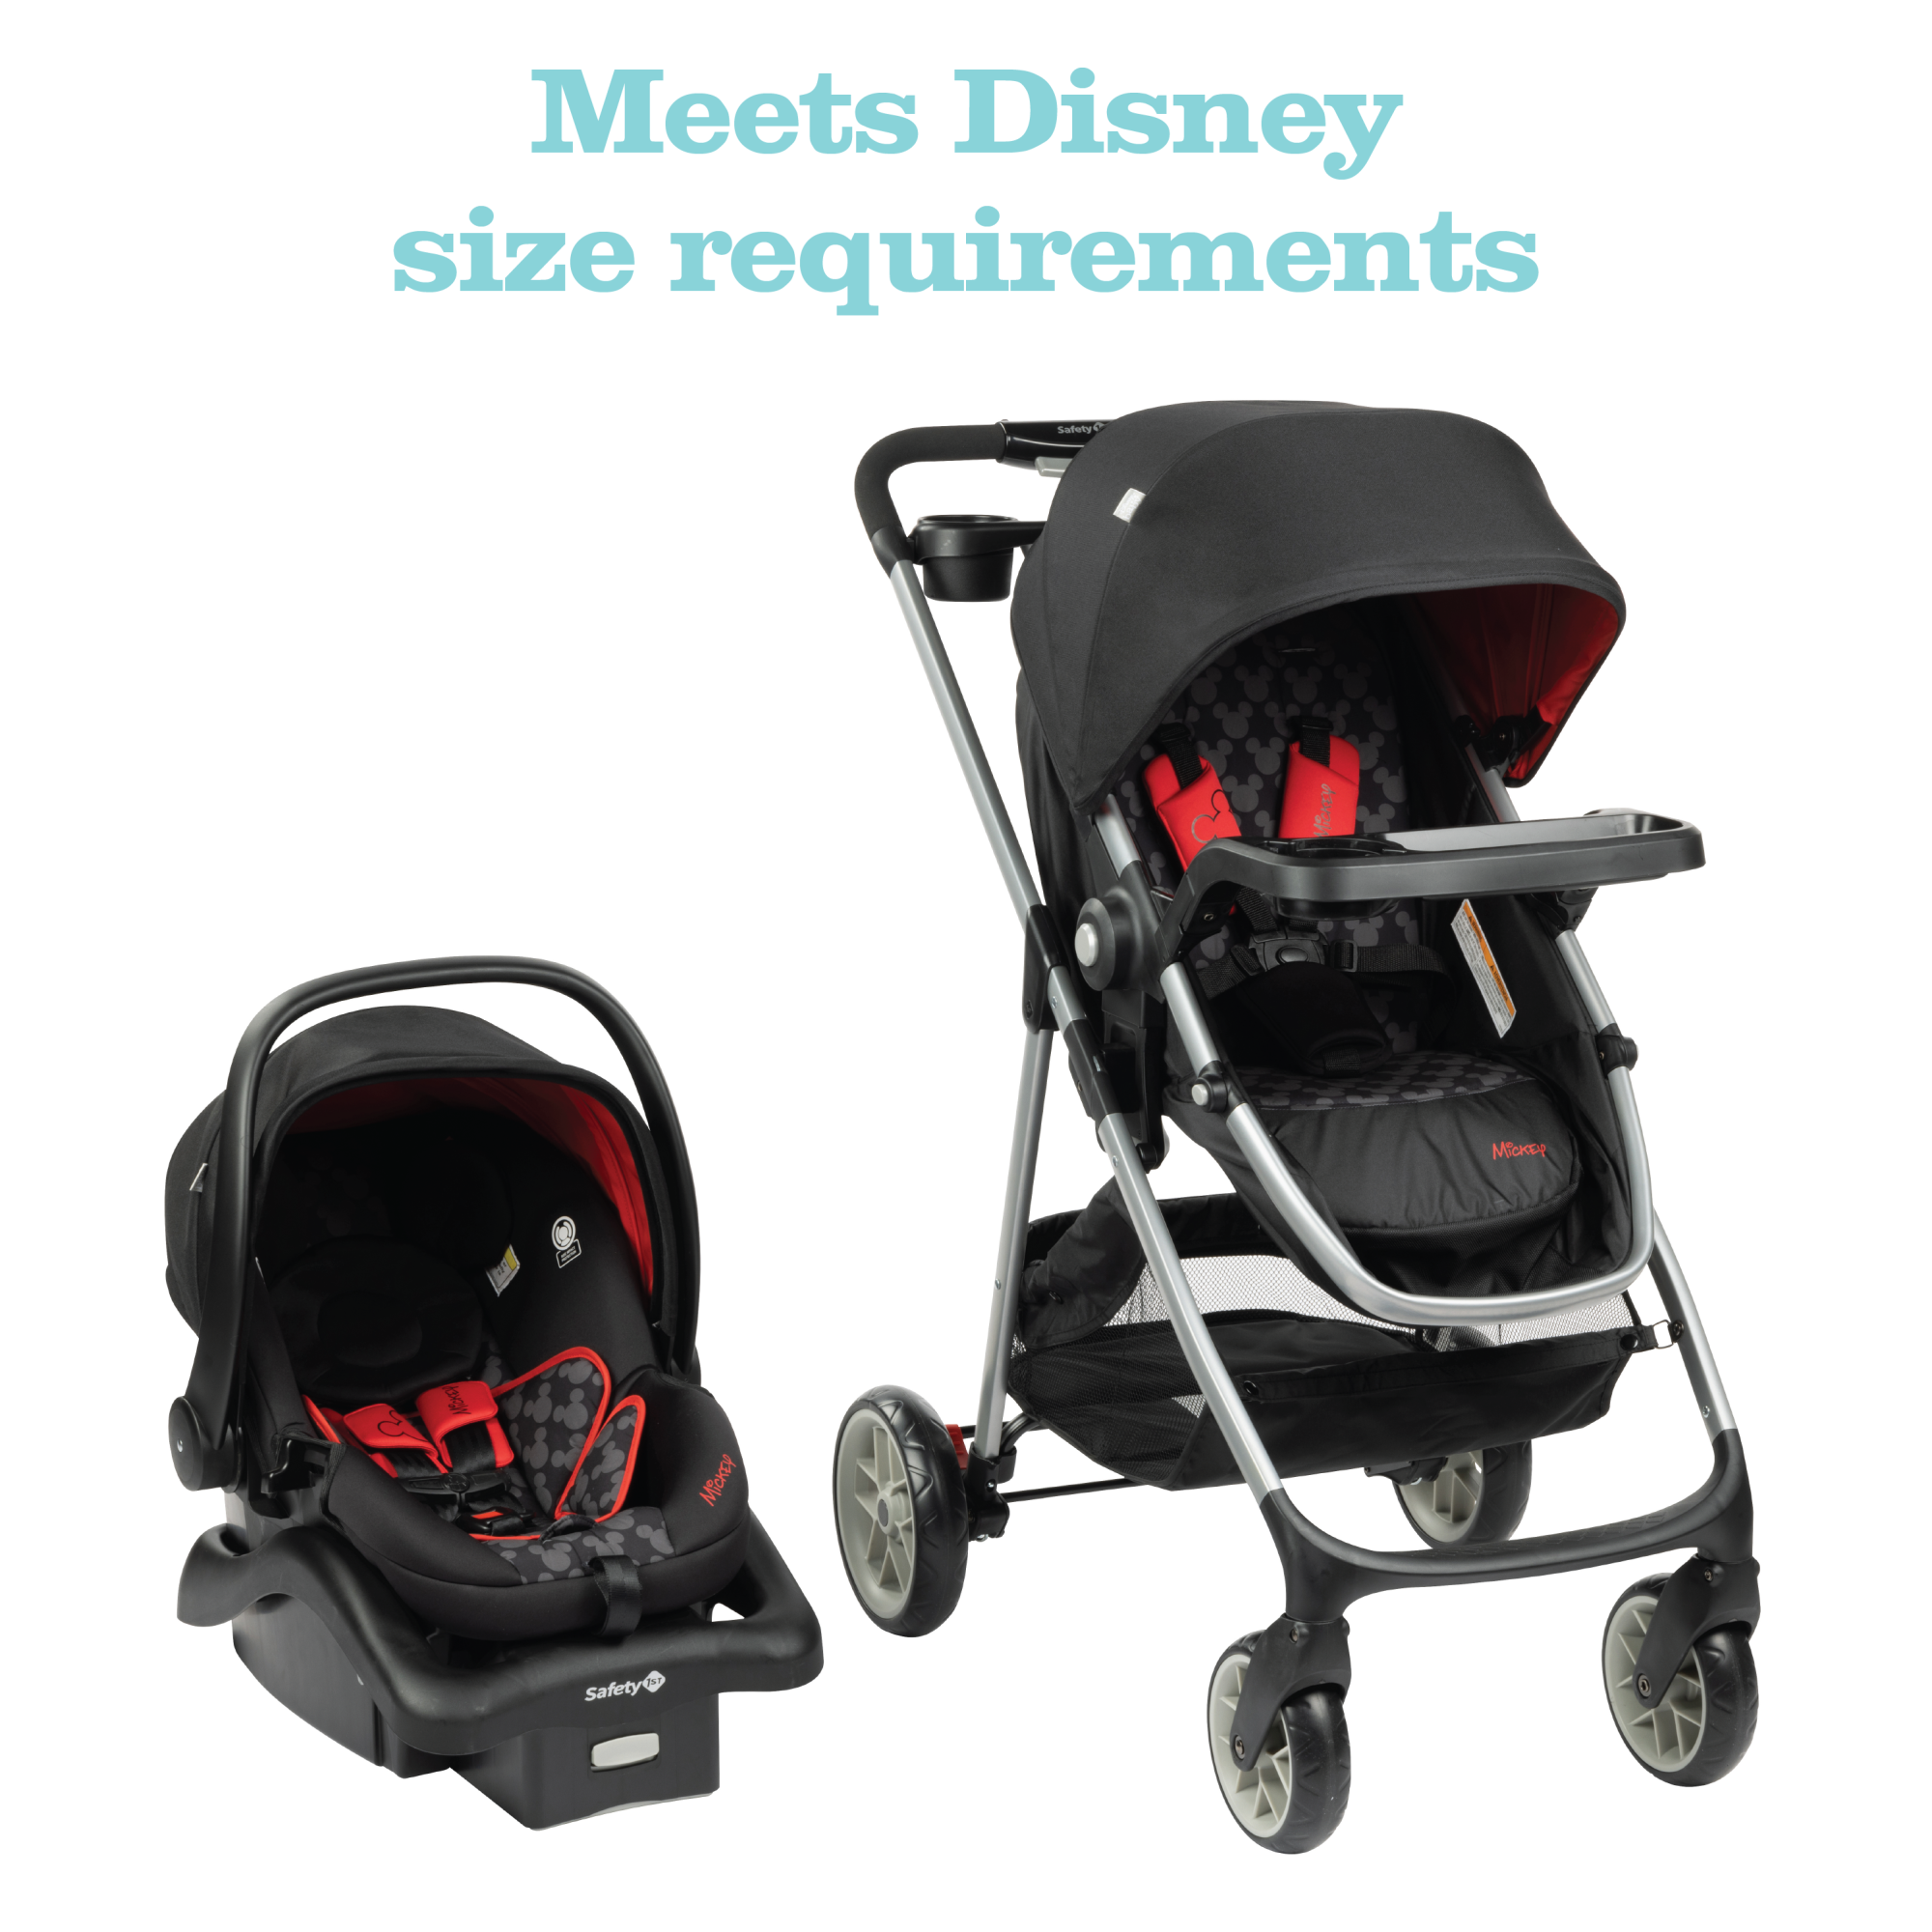 Disney Baby Grow and Go™ Modular Travel System - full parent tray with 2 large cup holders